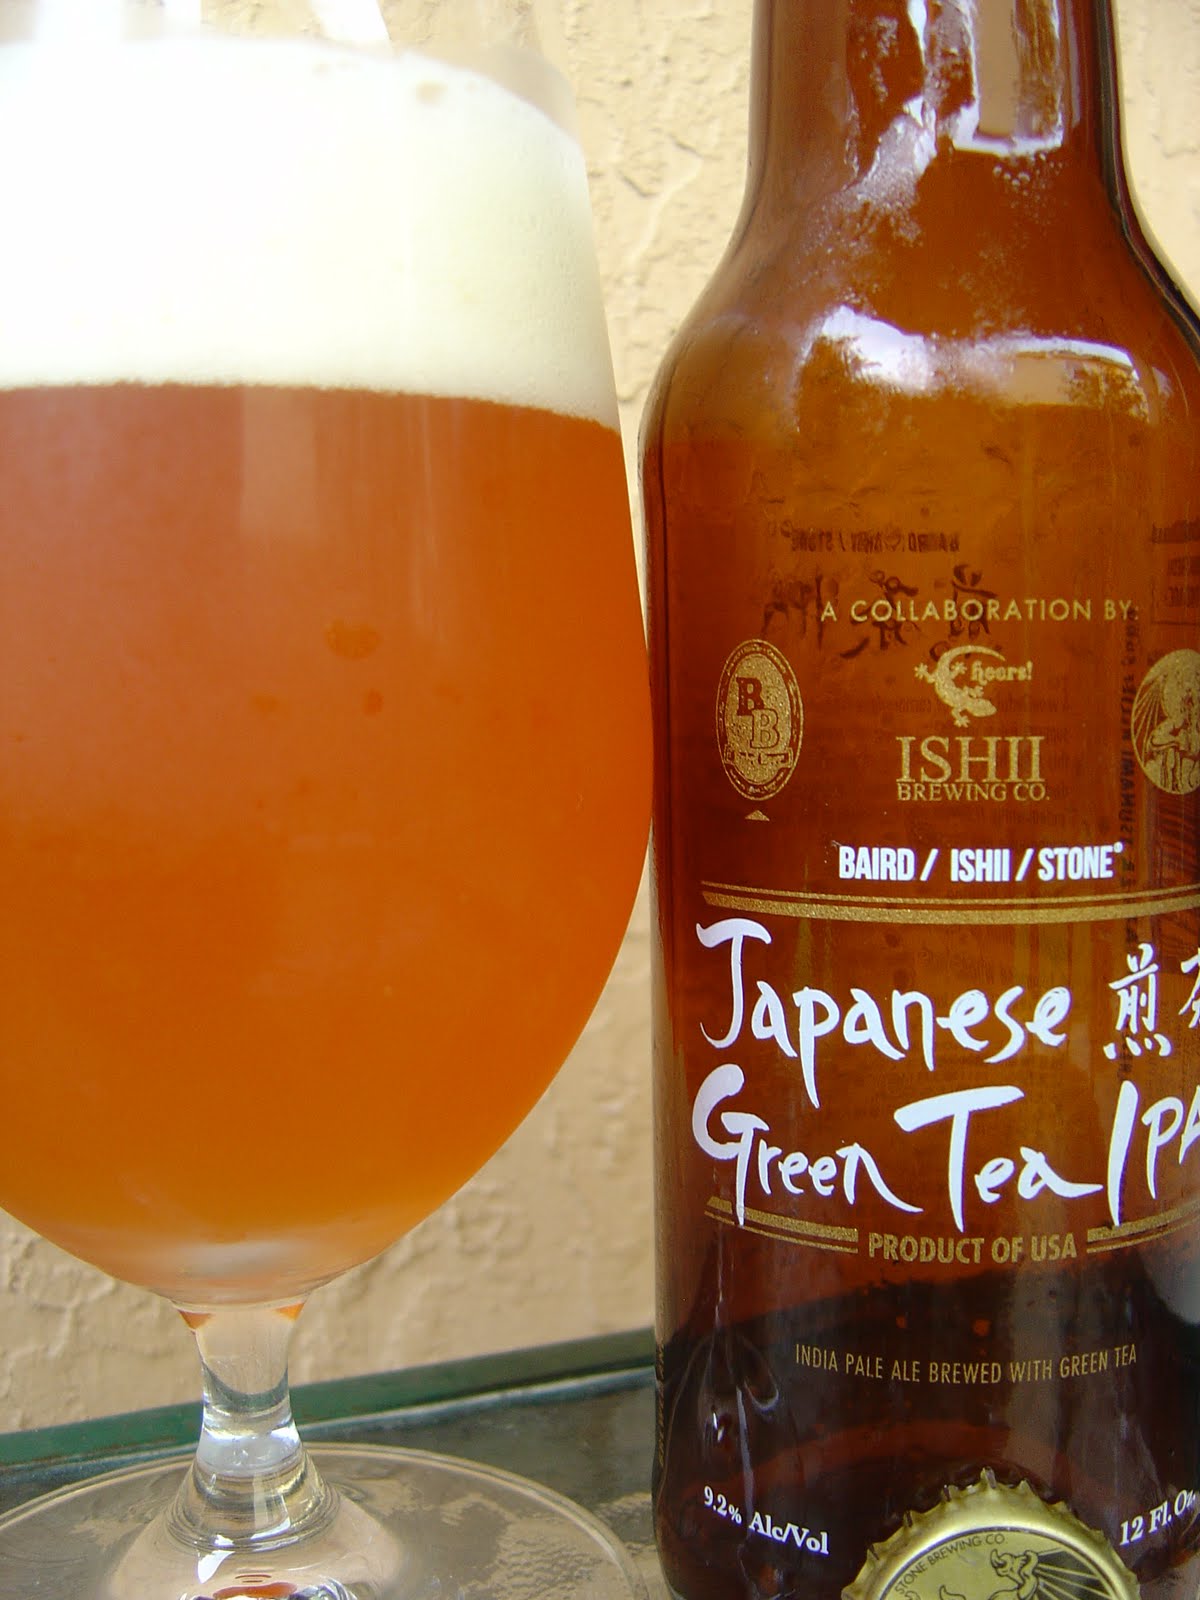 Daily Beer Review: Japanese Green Tea IPA